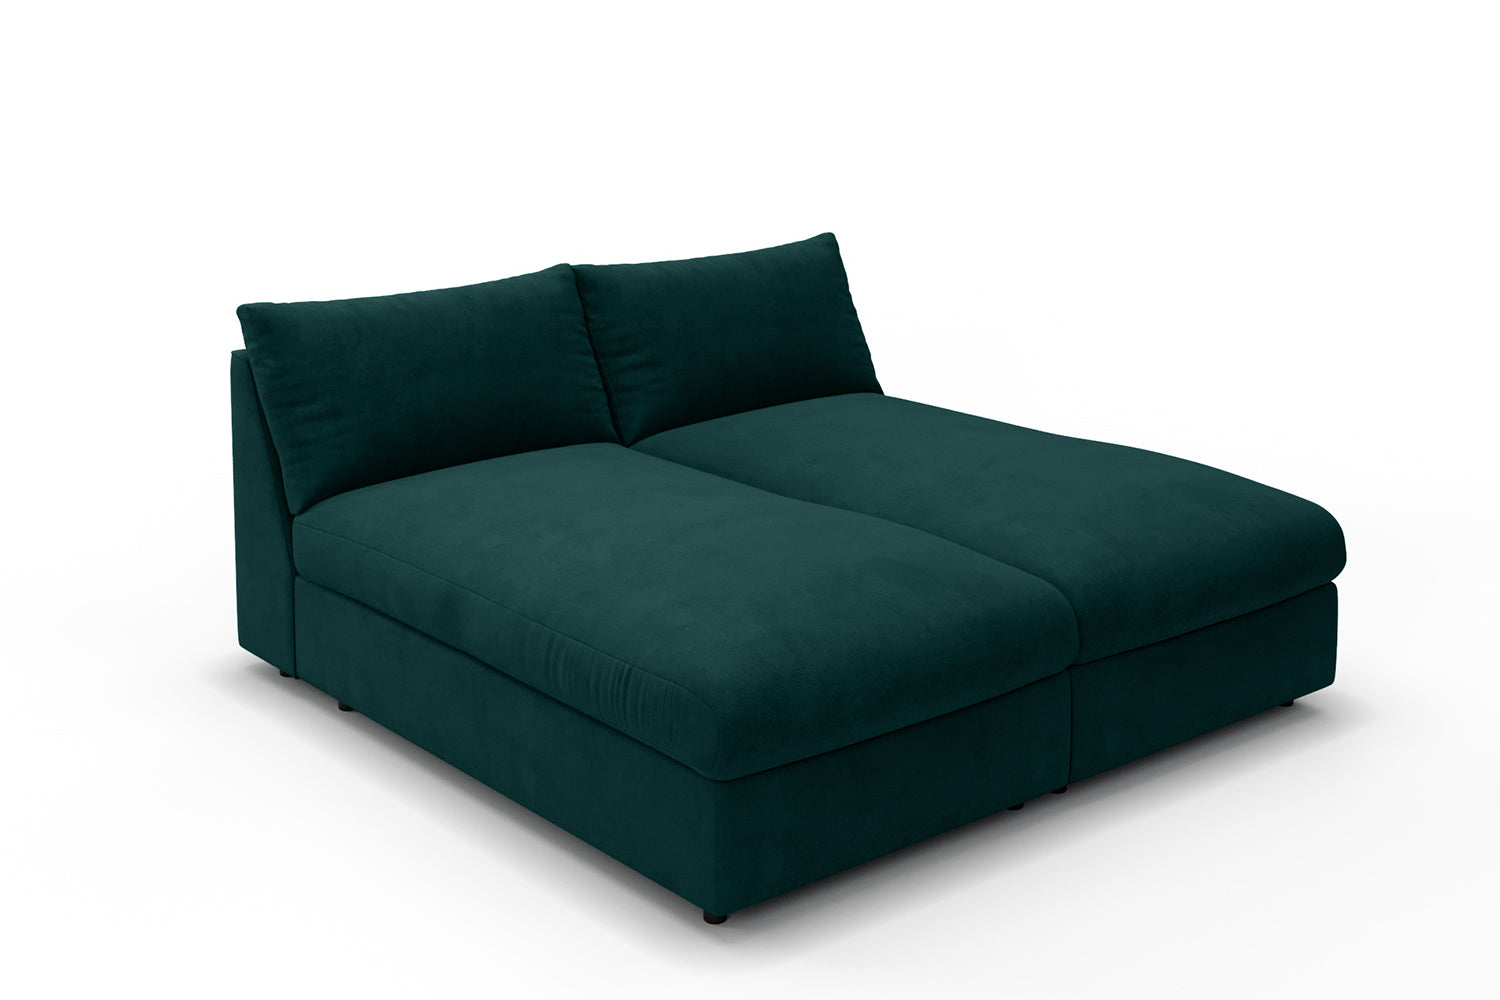 SNUG | The Cloud Sundae Daybed in Pine Green